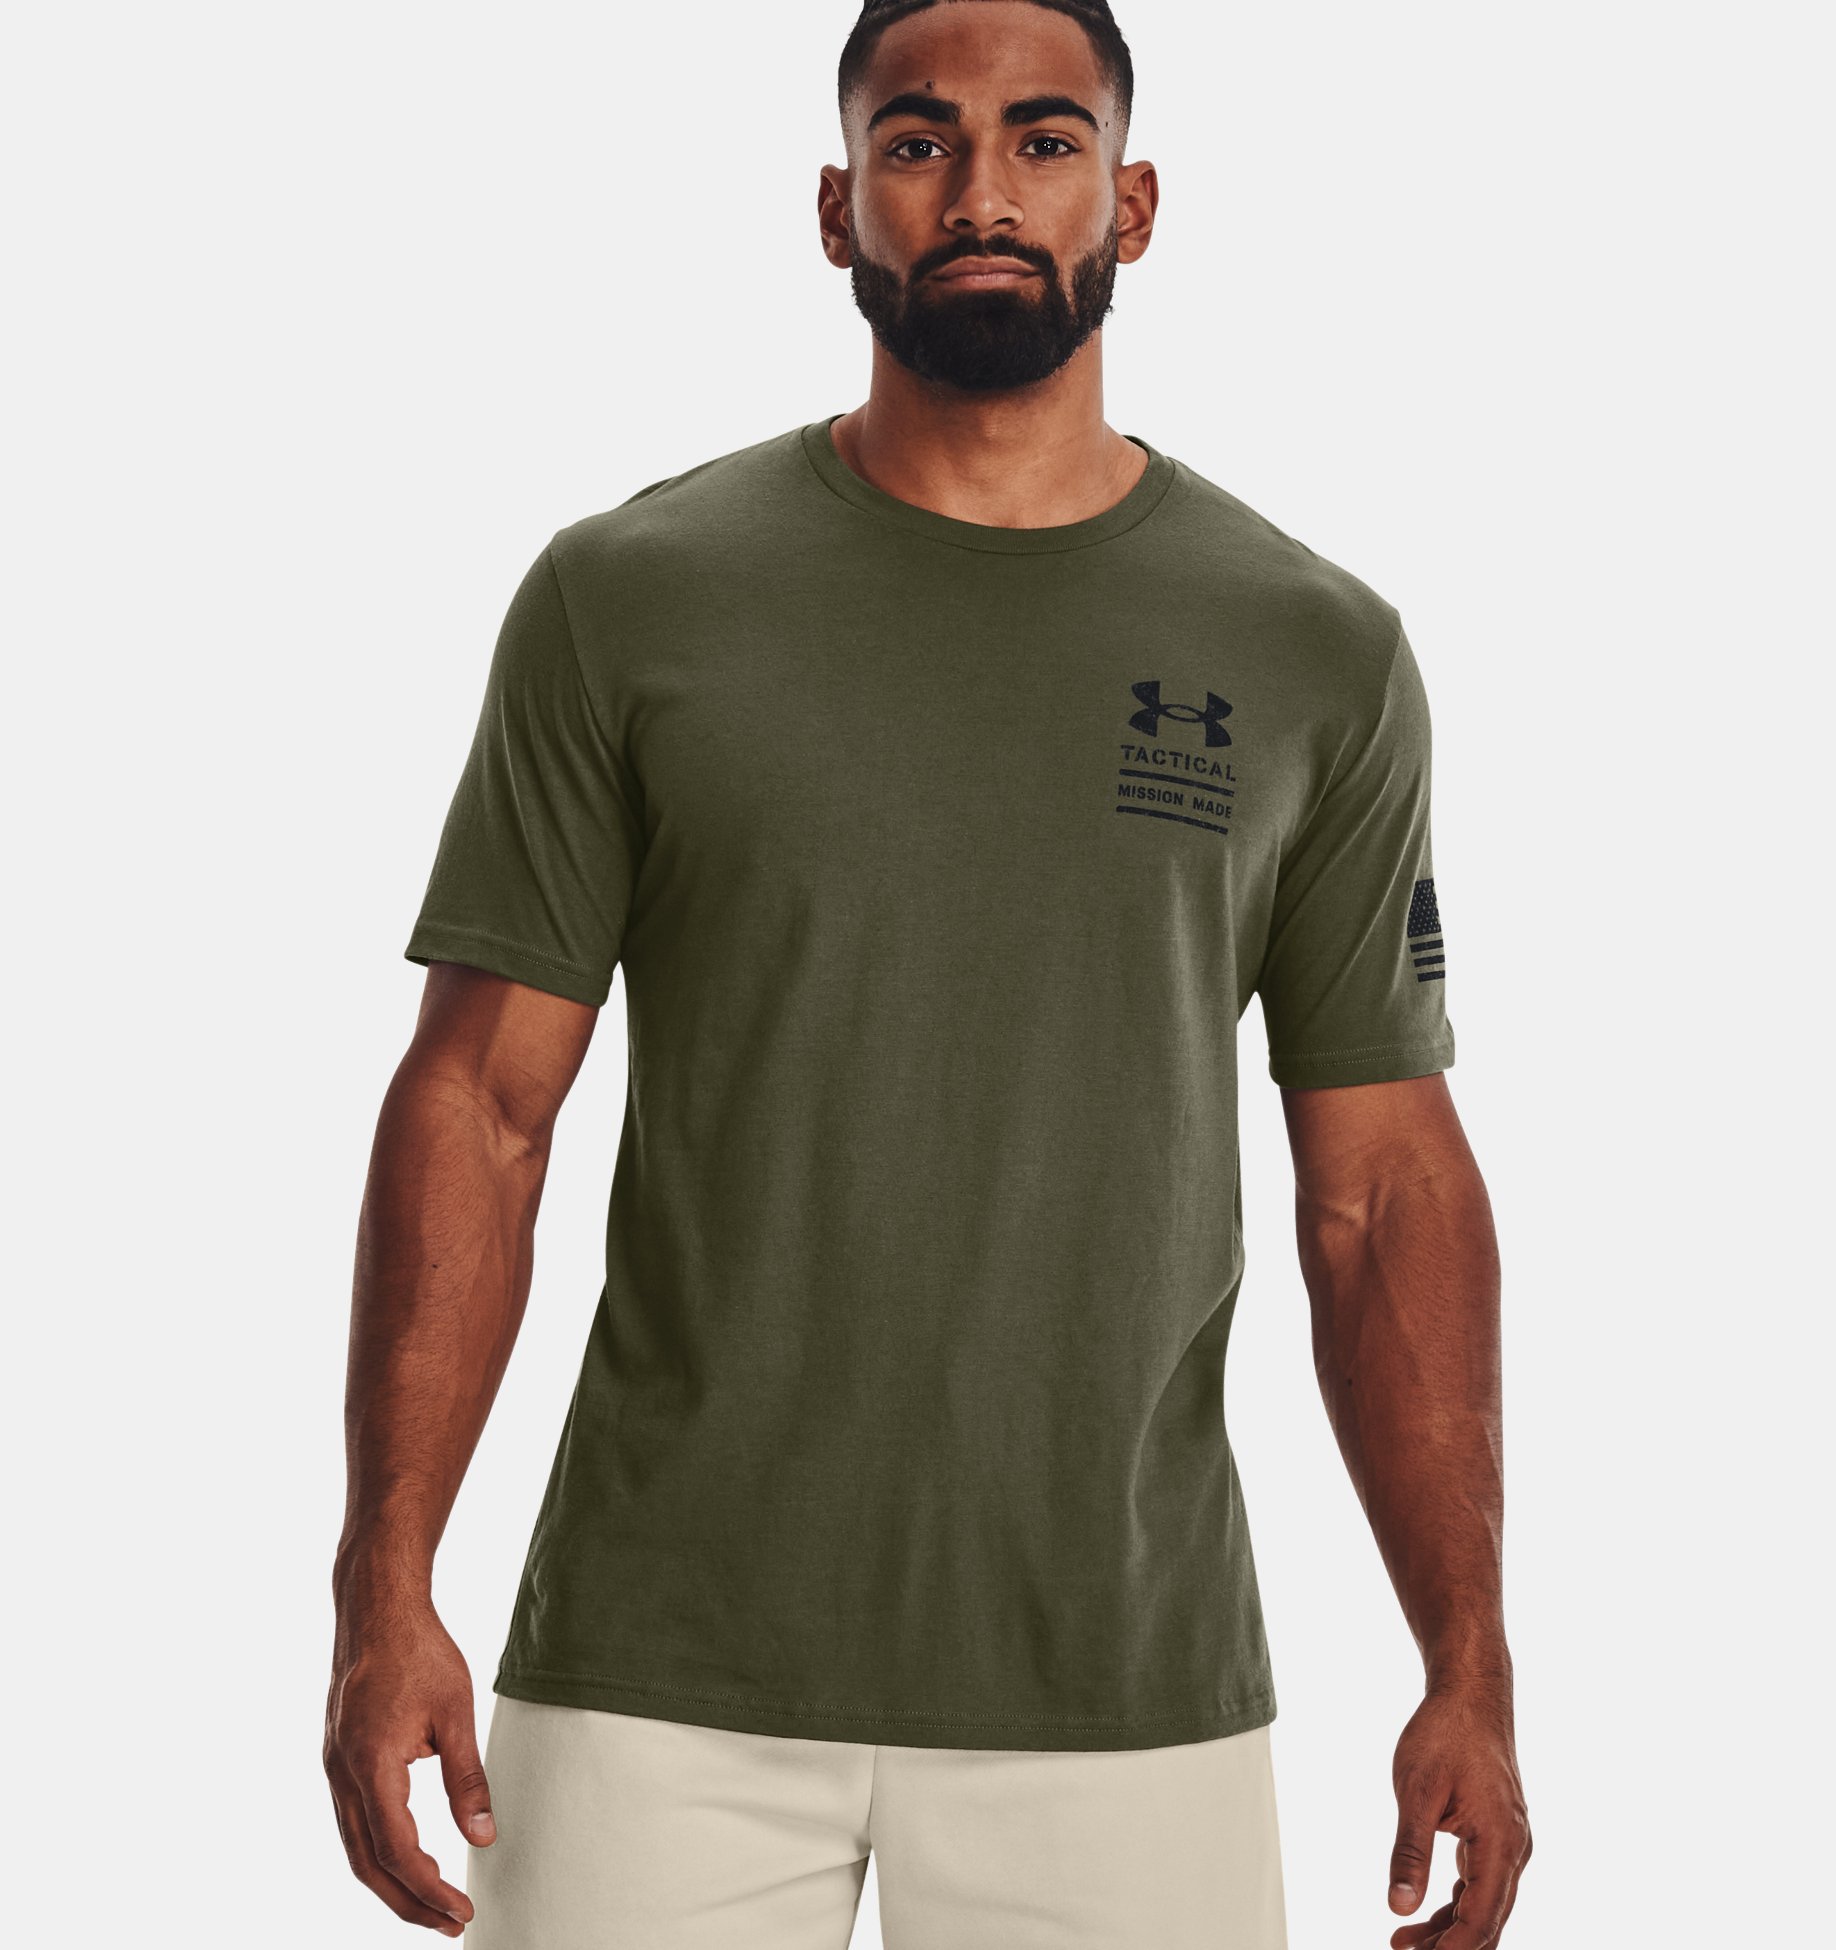 Men's Under Armour Freedom Free & Brave T-Shirt.Size:XL Color:Marine Od Green 